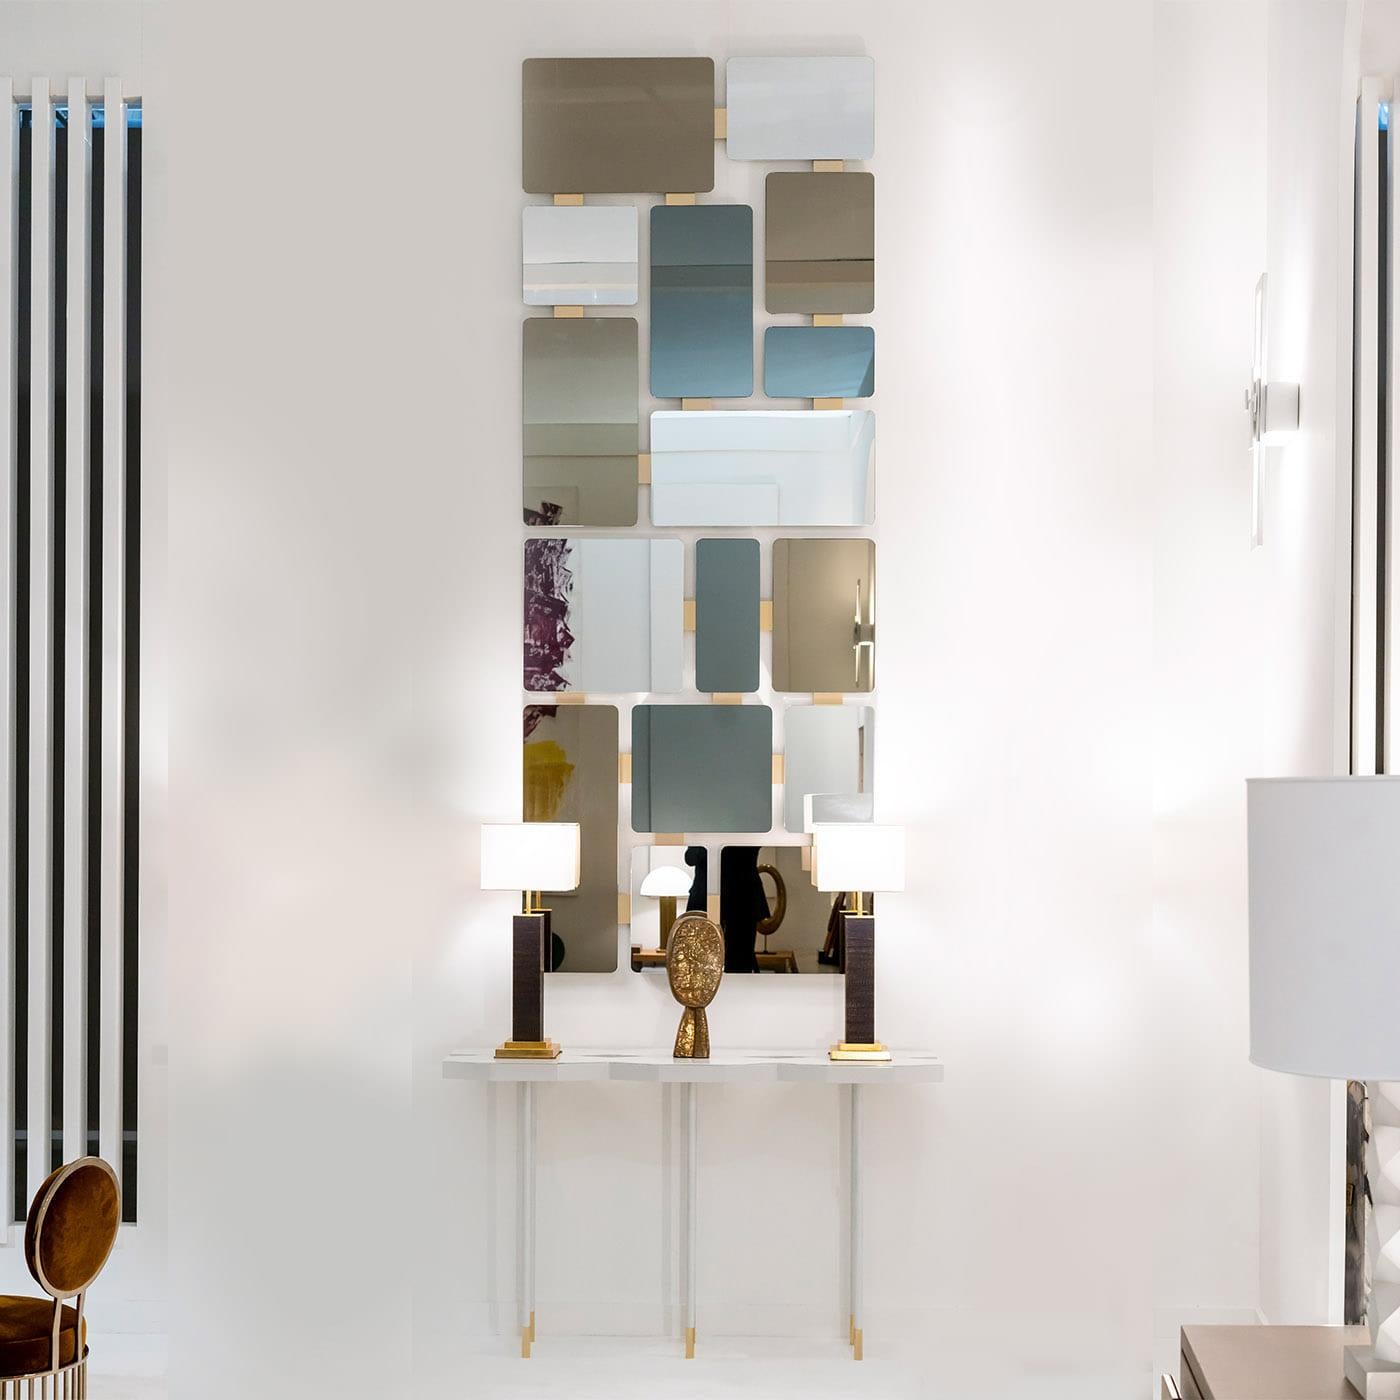 A stunning sculptural design, this iconic mirror is composed of eight mirrors displaying different shapes and sizes, as well as finishes. Mounted on a matte white-lacquered wooden base, each mirror is connected with 18K gold-plated brass inserts.